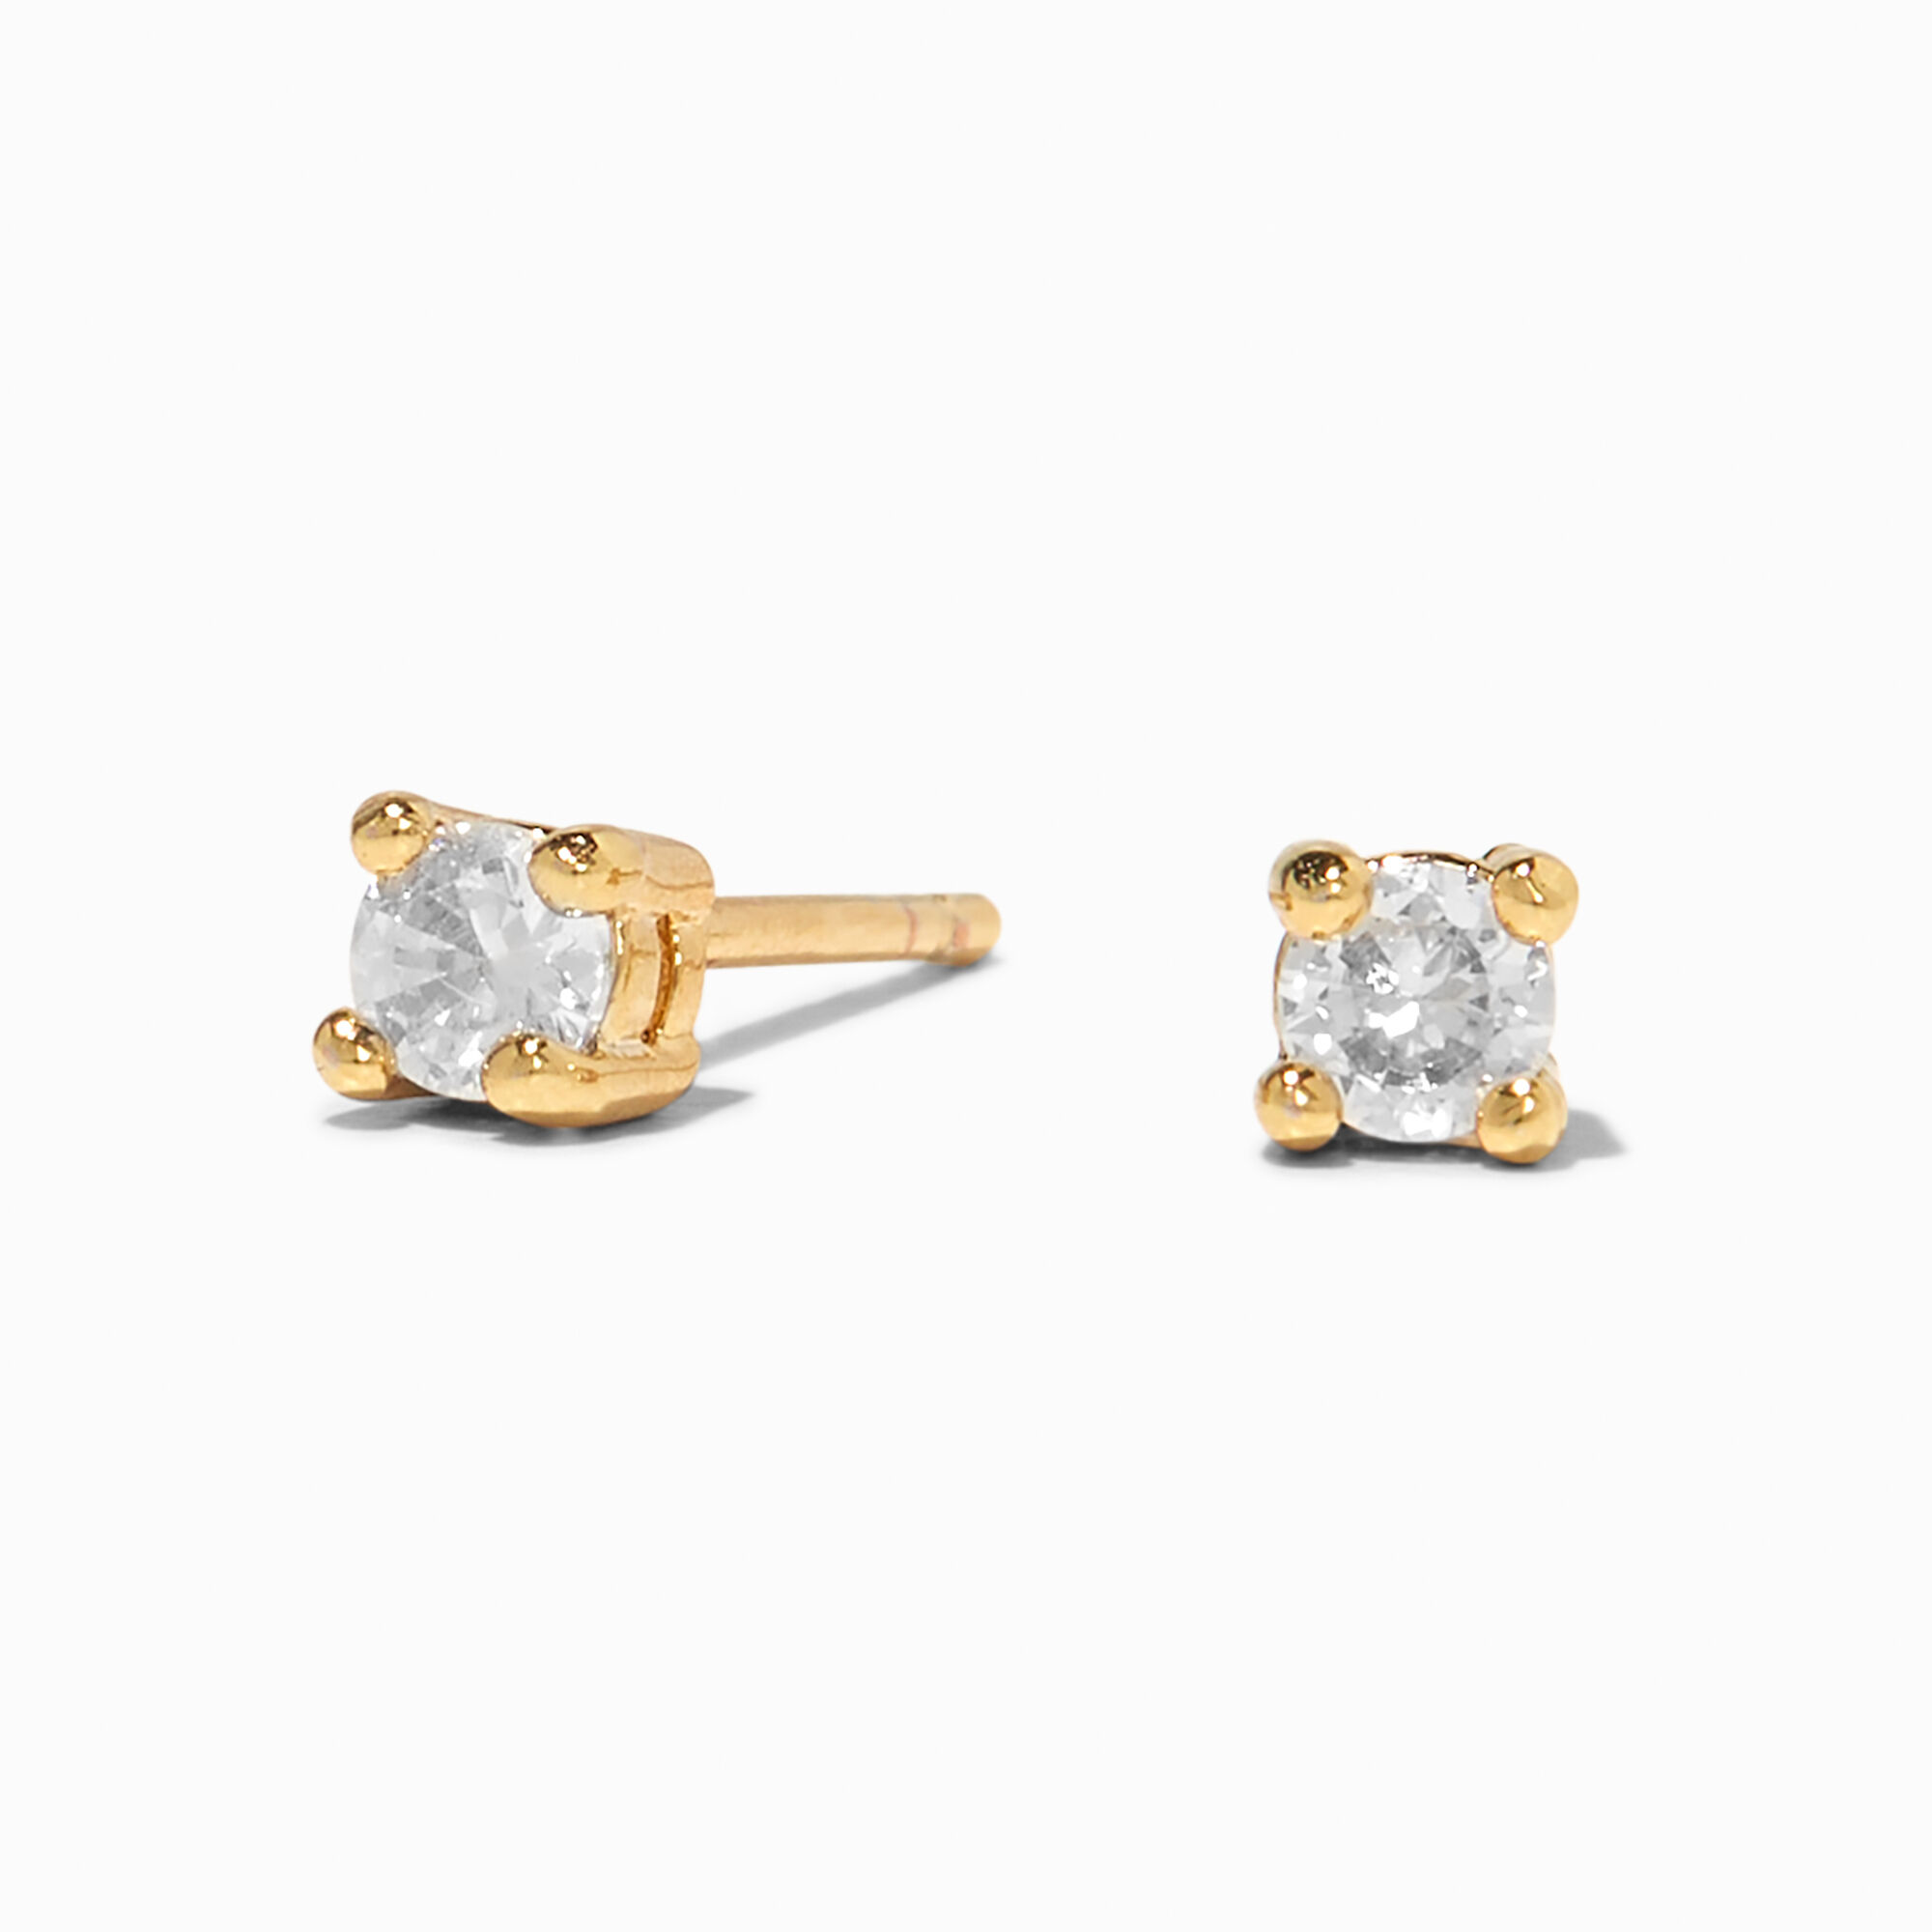 View Claires 18K Plated Cubic Zirconia 3MM Round Stud Earrings Gold information